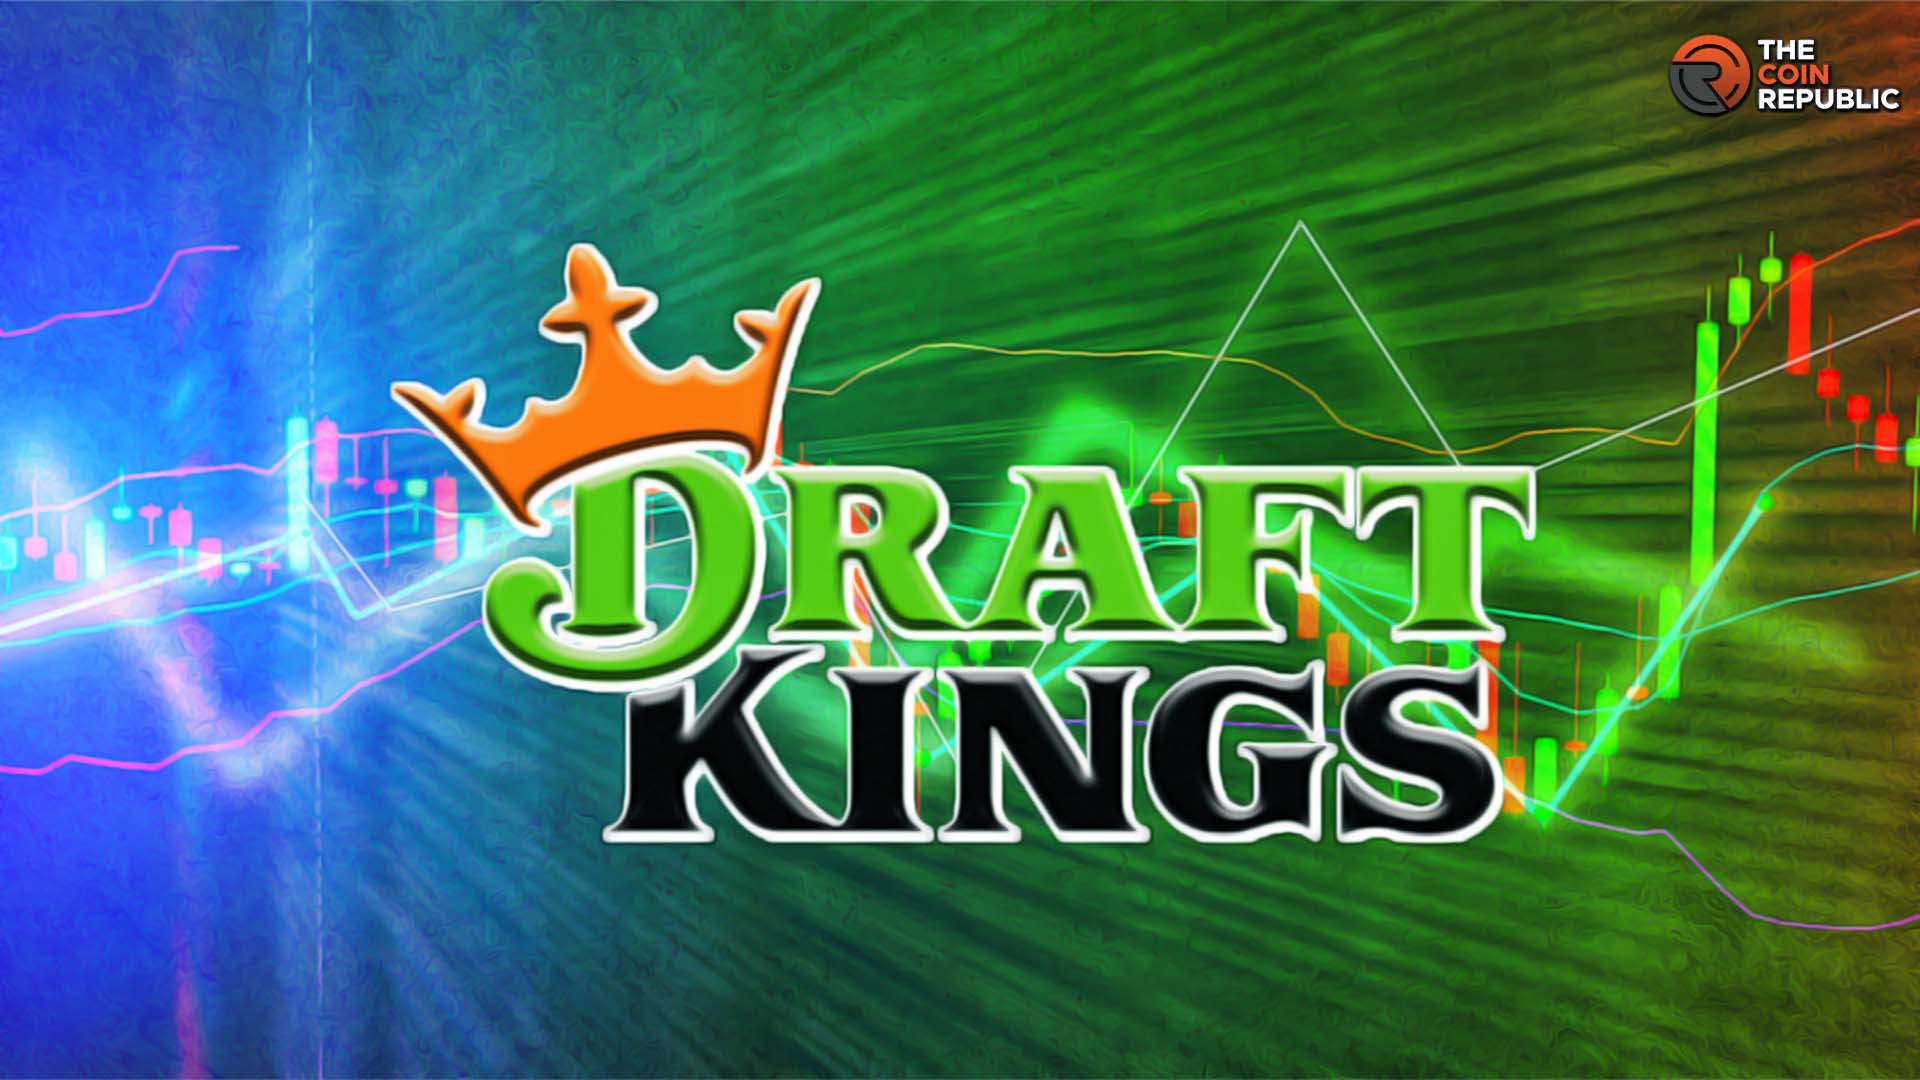 DraftKings Stock: DKNG Stock at Crucial Support, Earnings Ahead